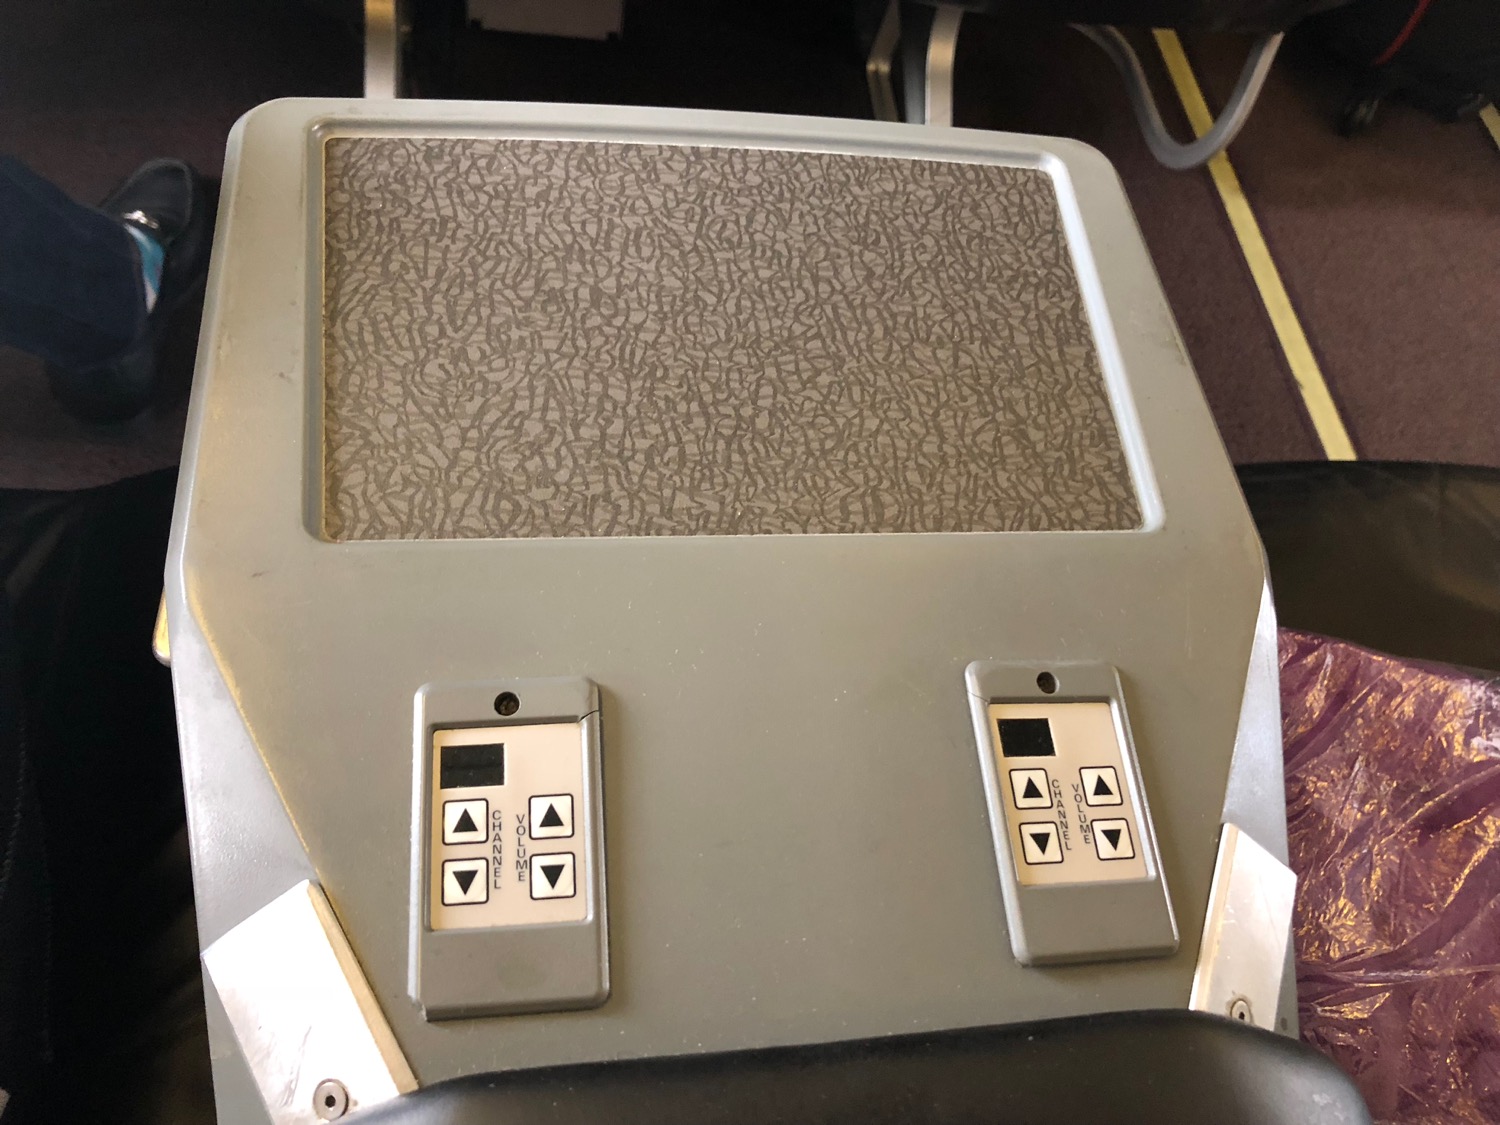 a rectangular object with buttons and switches